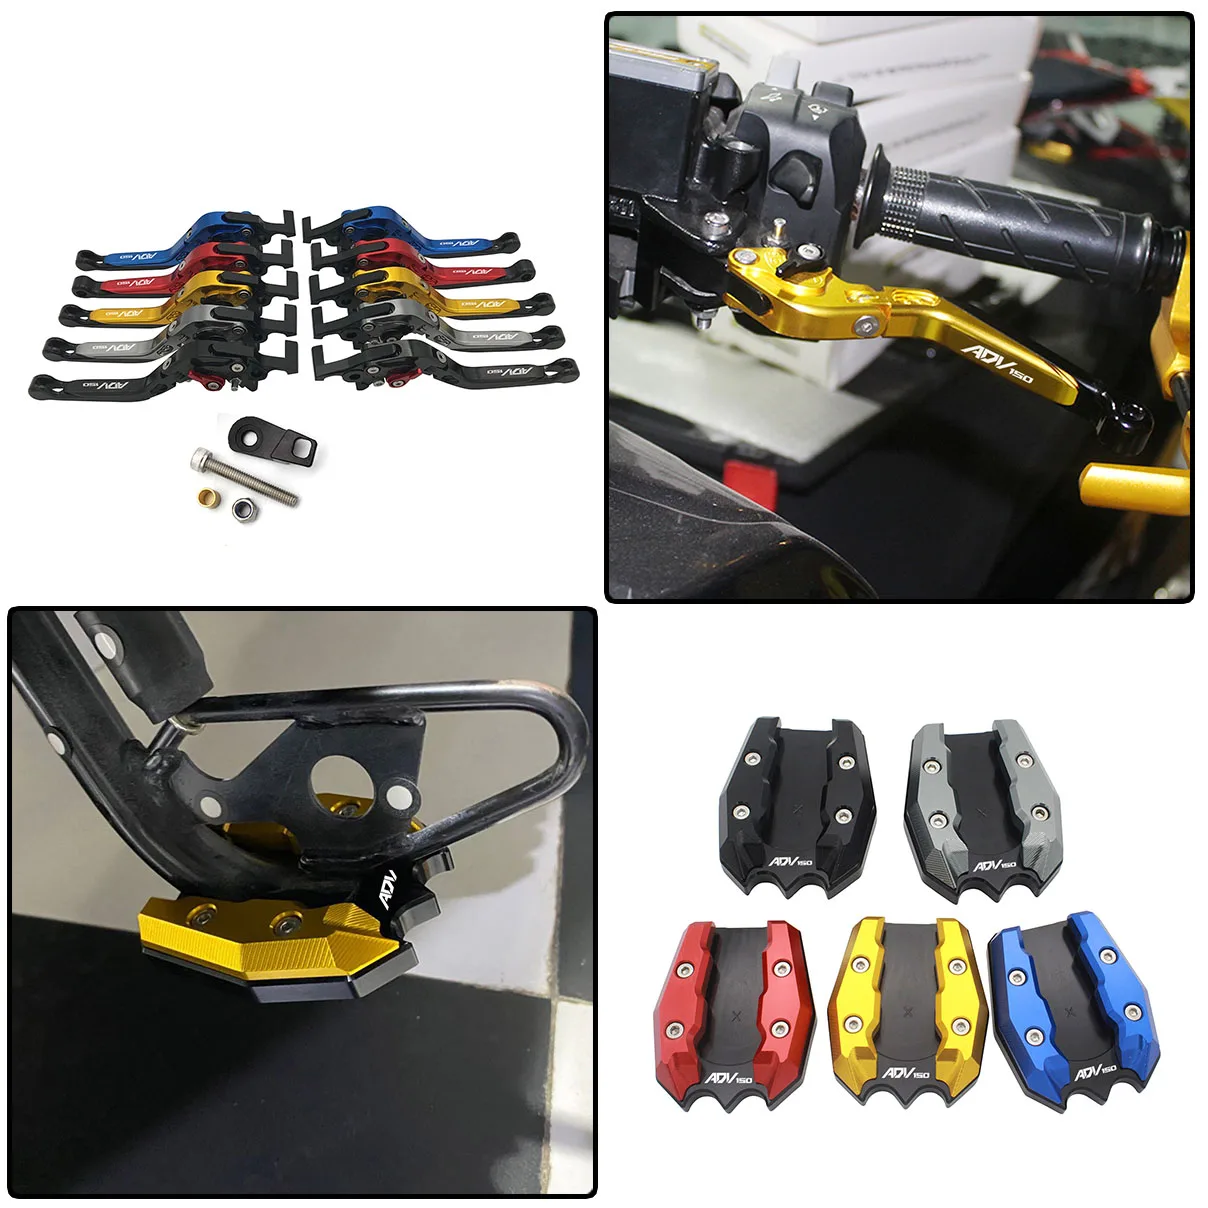 SEMSPEED For ADV150 ADV 150 2019 2020 Parking Levers Foot Side Stand Protector Kit CNC Motorcycle Foldable Brake Clutch Lever